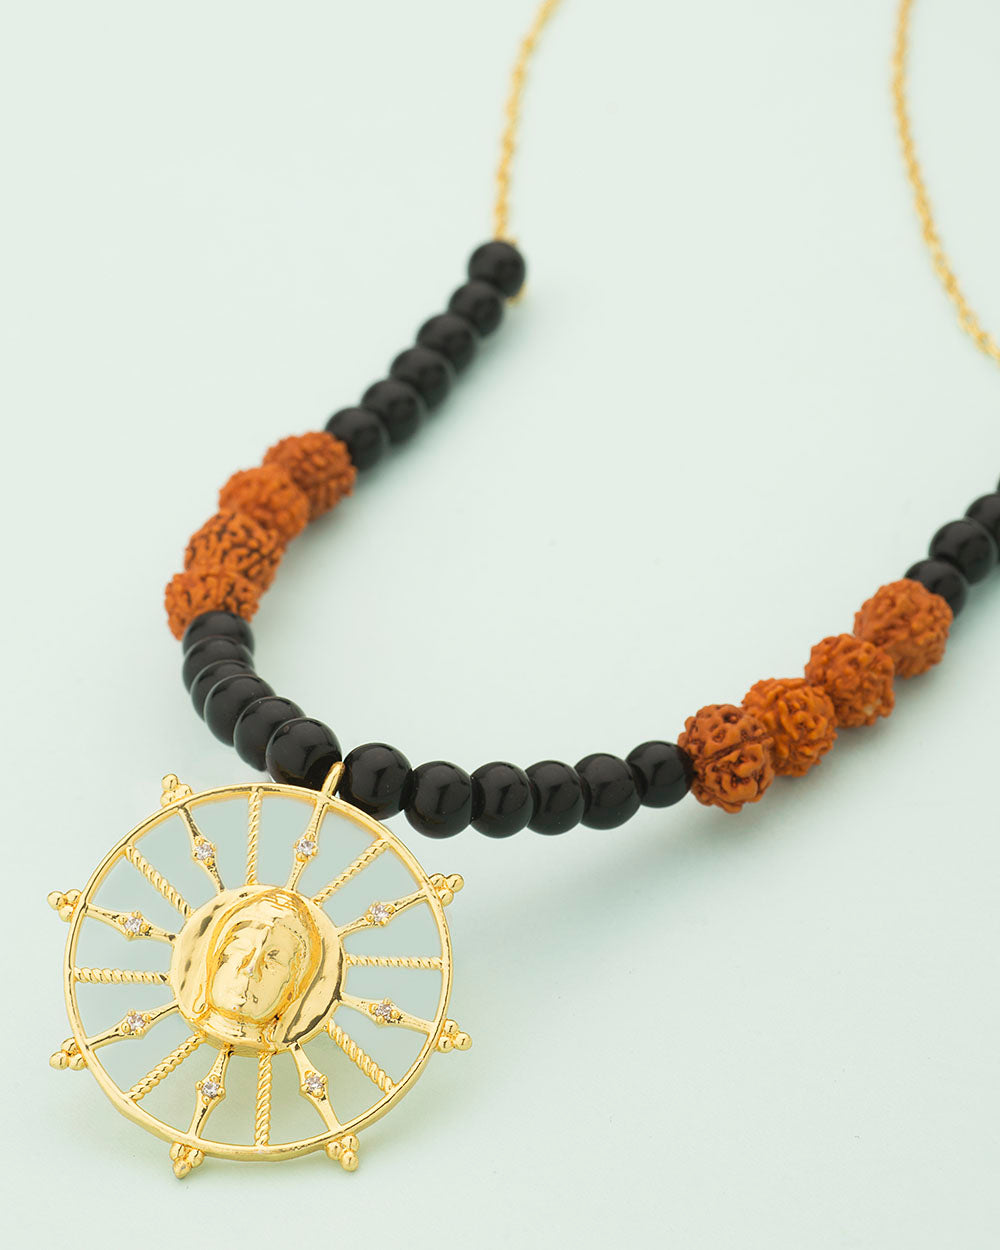 Lord Buddha Inscribed In A Chakra Designer Pendant With Rudraksha & Black Beaded Chain For Men